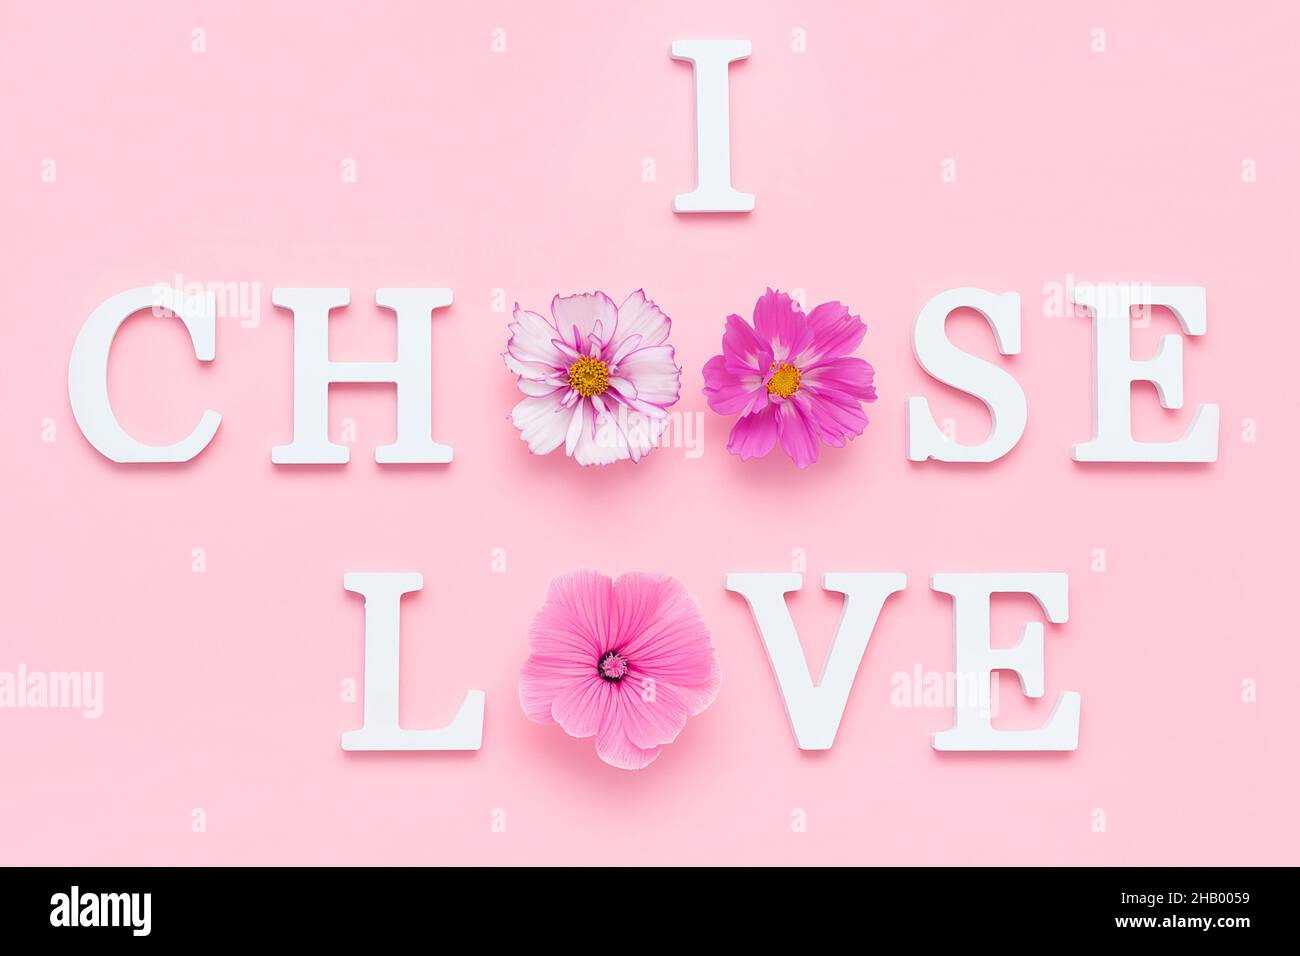 I choose love. Motivational quote from white letters and beauty natural flowers on pink background. Creative concept Happy Valentine's Day. Stock Photo